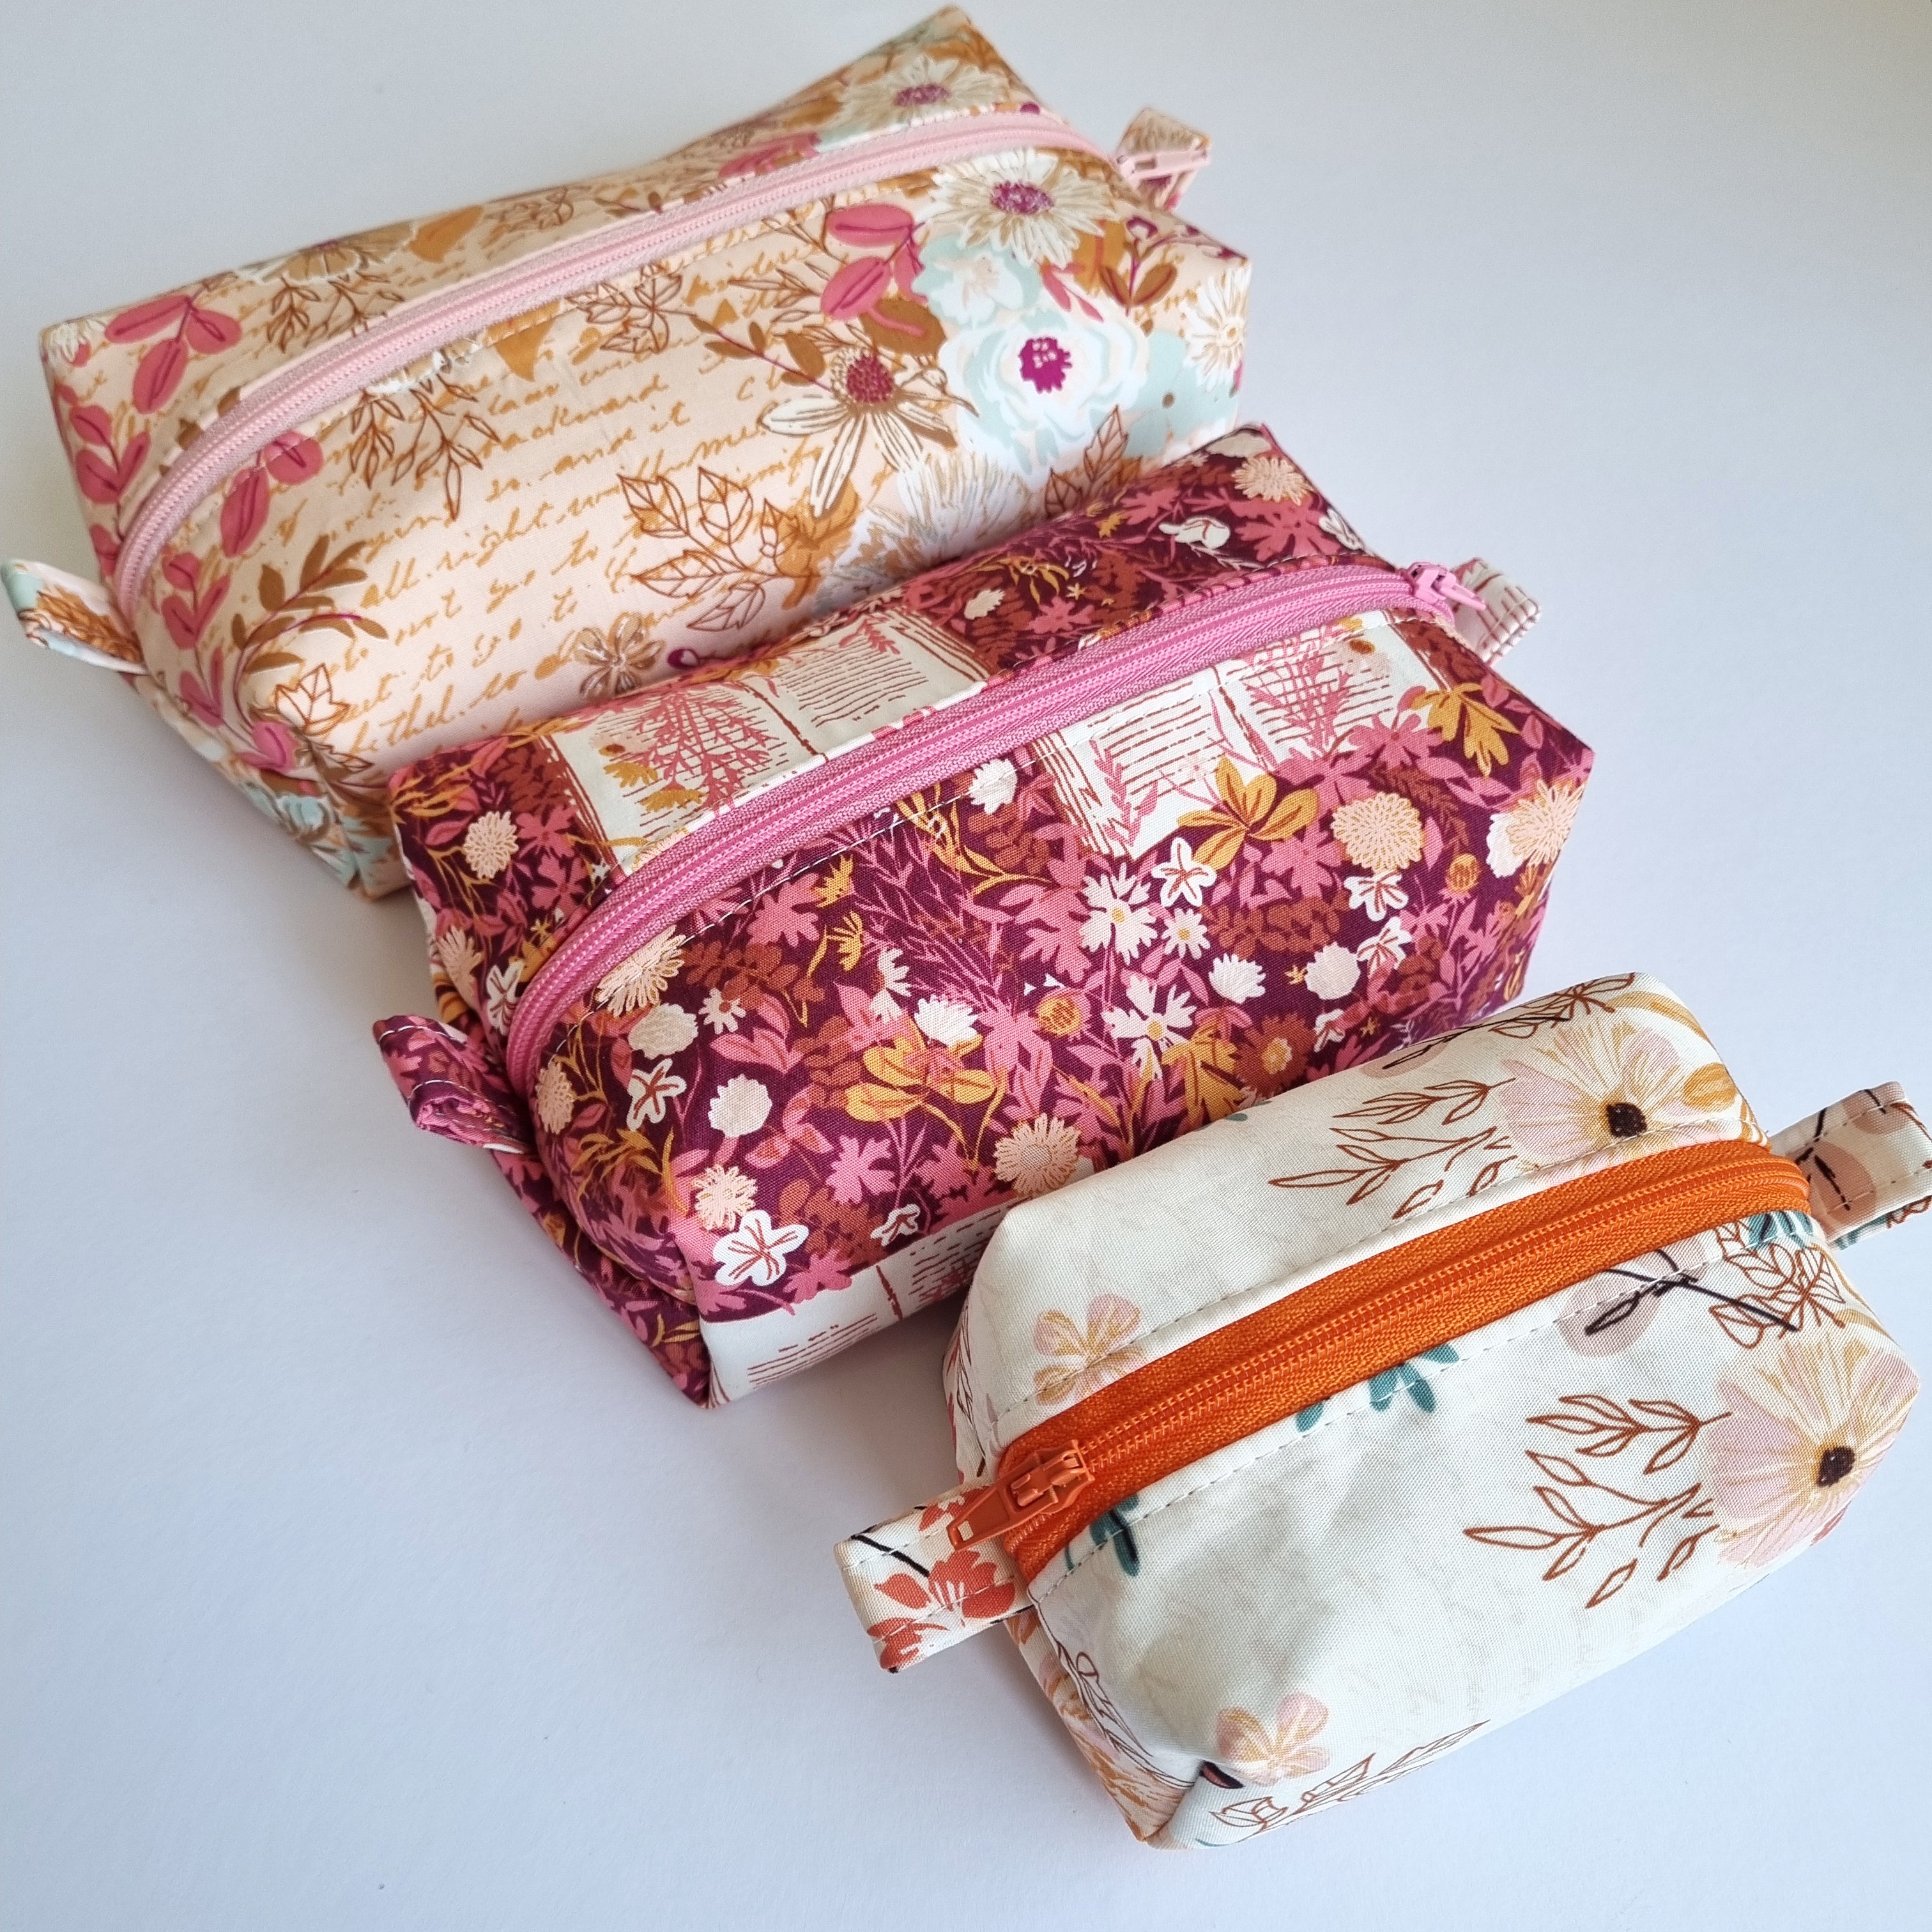 Compact Boxy Bag with Mountain Print - Ideal for Travel-Size Cosmetics or  Sewing Kit